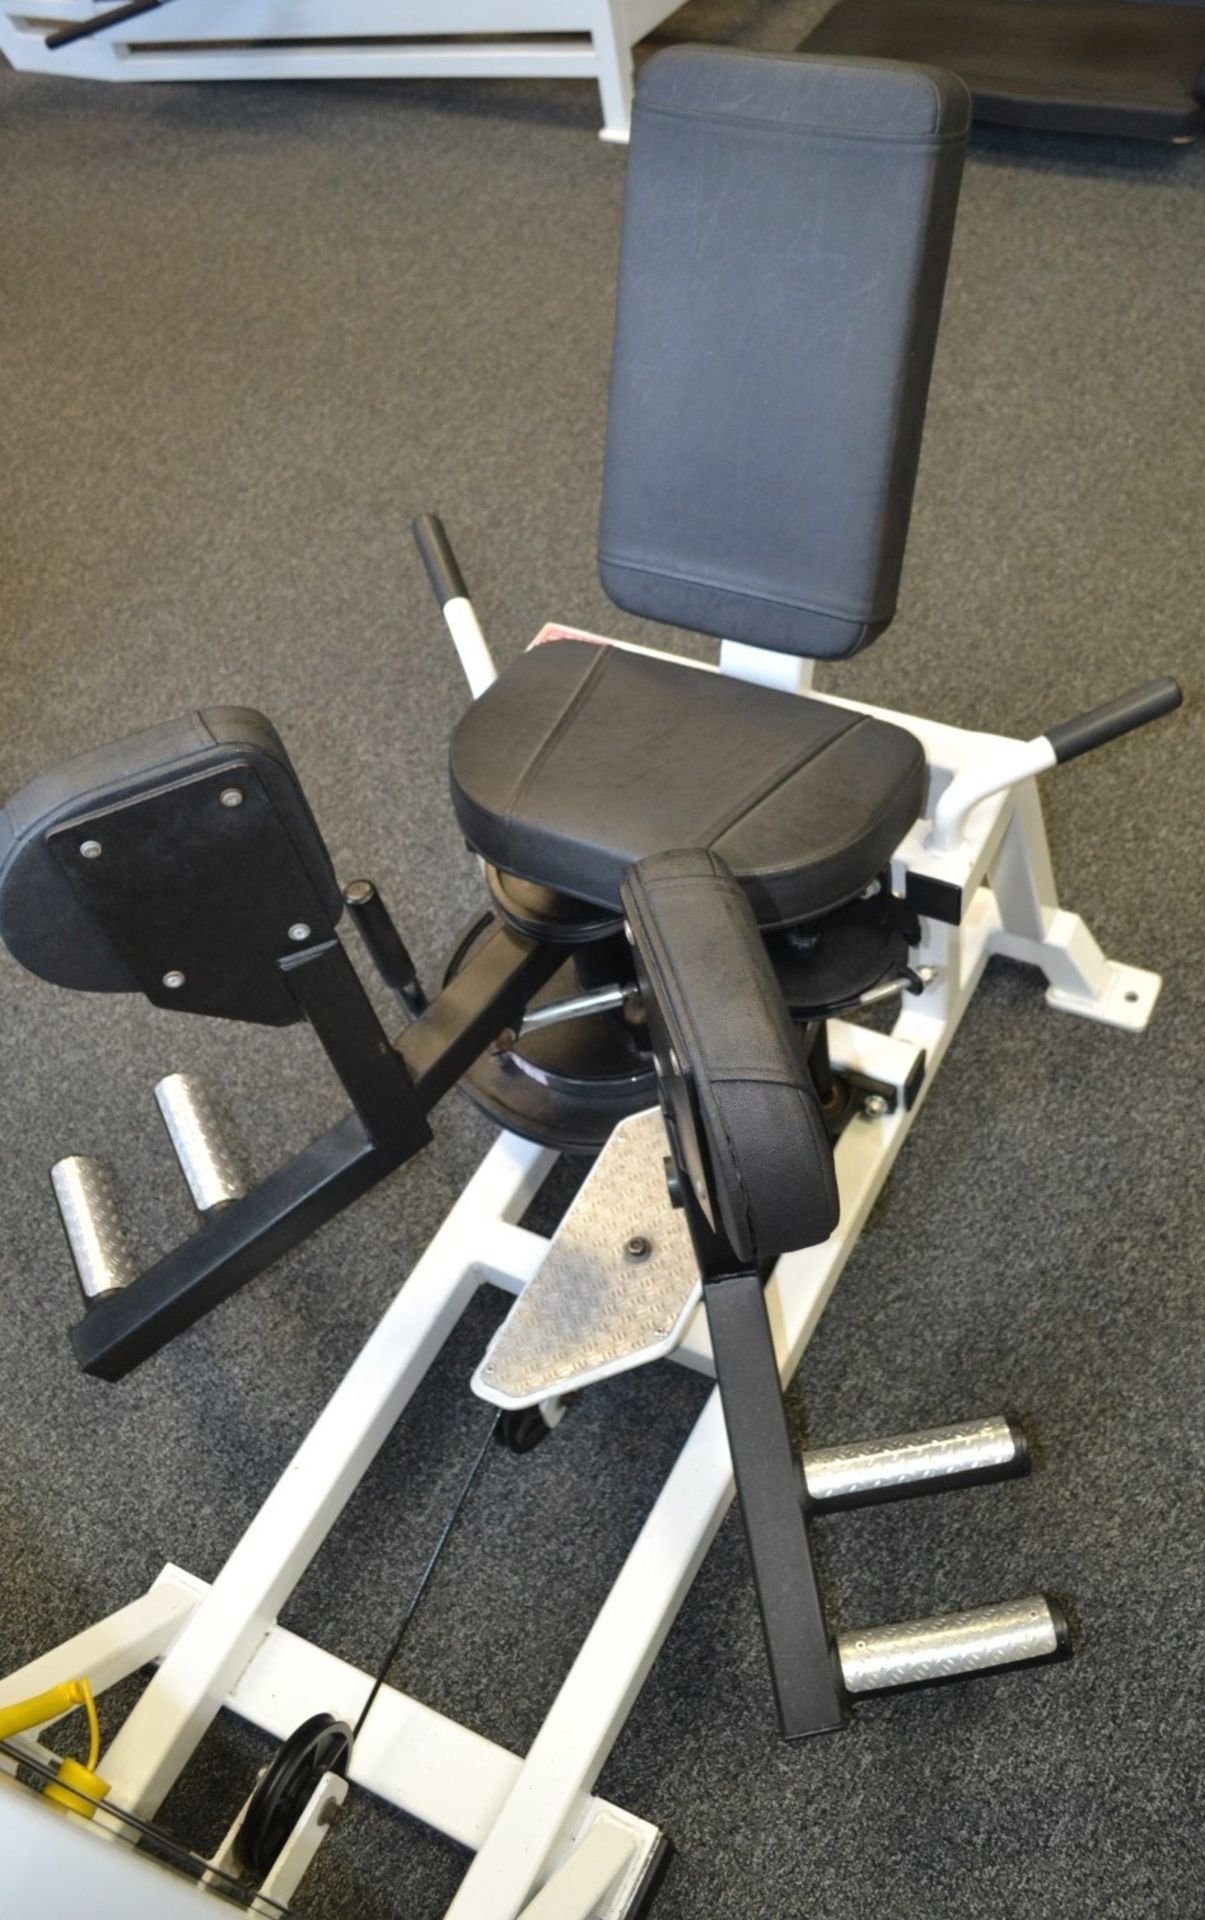 1 x Force Inner Thigh Abductor Pin Loaded Gym Machine With 75kg Weights - Image 3 of 4